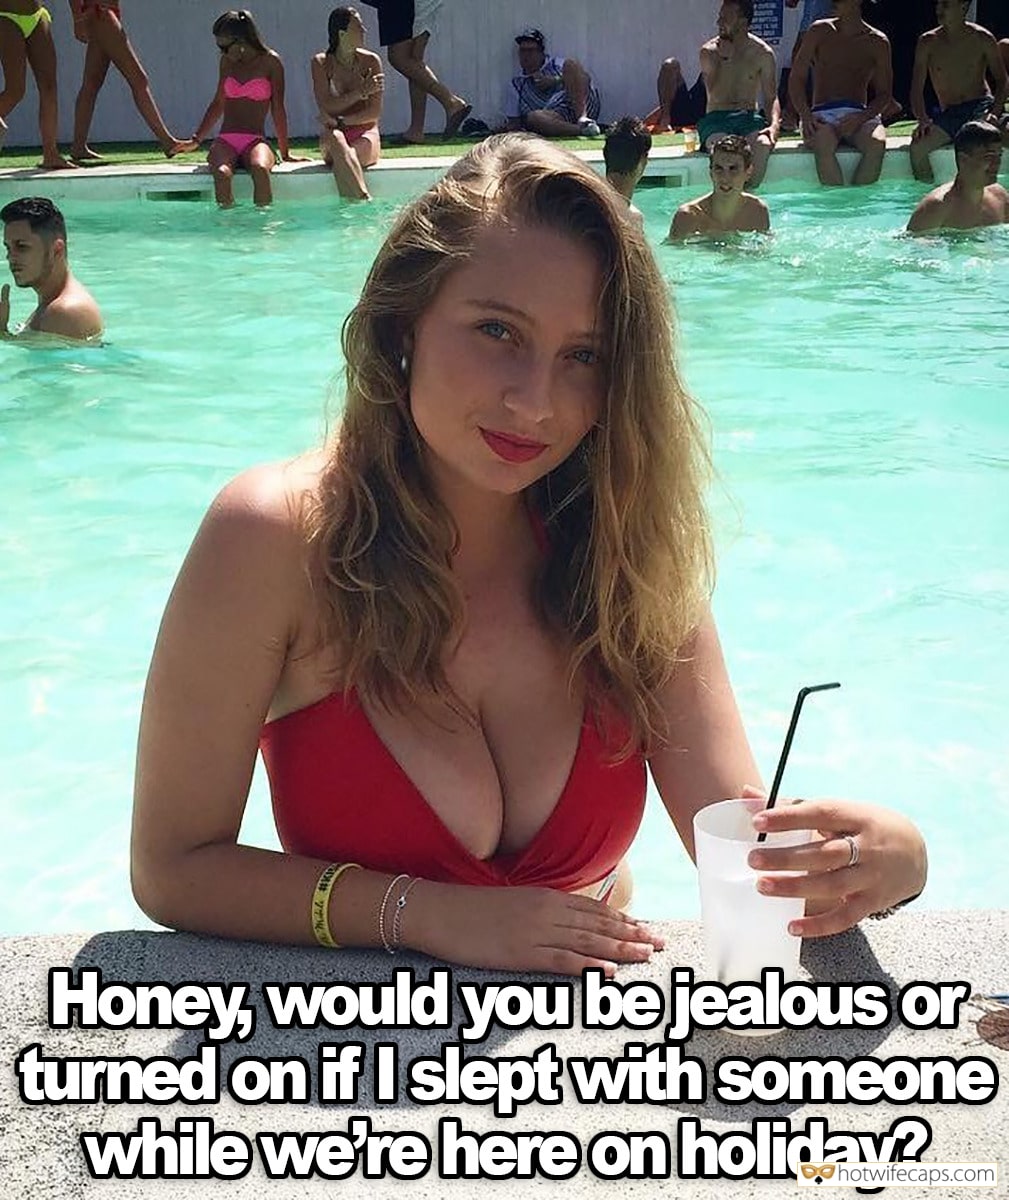 Sexy Memes hotwife caption: Honey, would you bejealous or turned on if I slept with someone while we’re here on holiday? jealous sexcaptions There Is Nothing to Get Jealous About